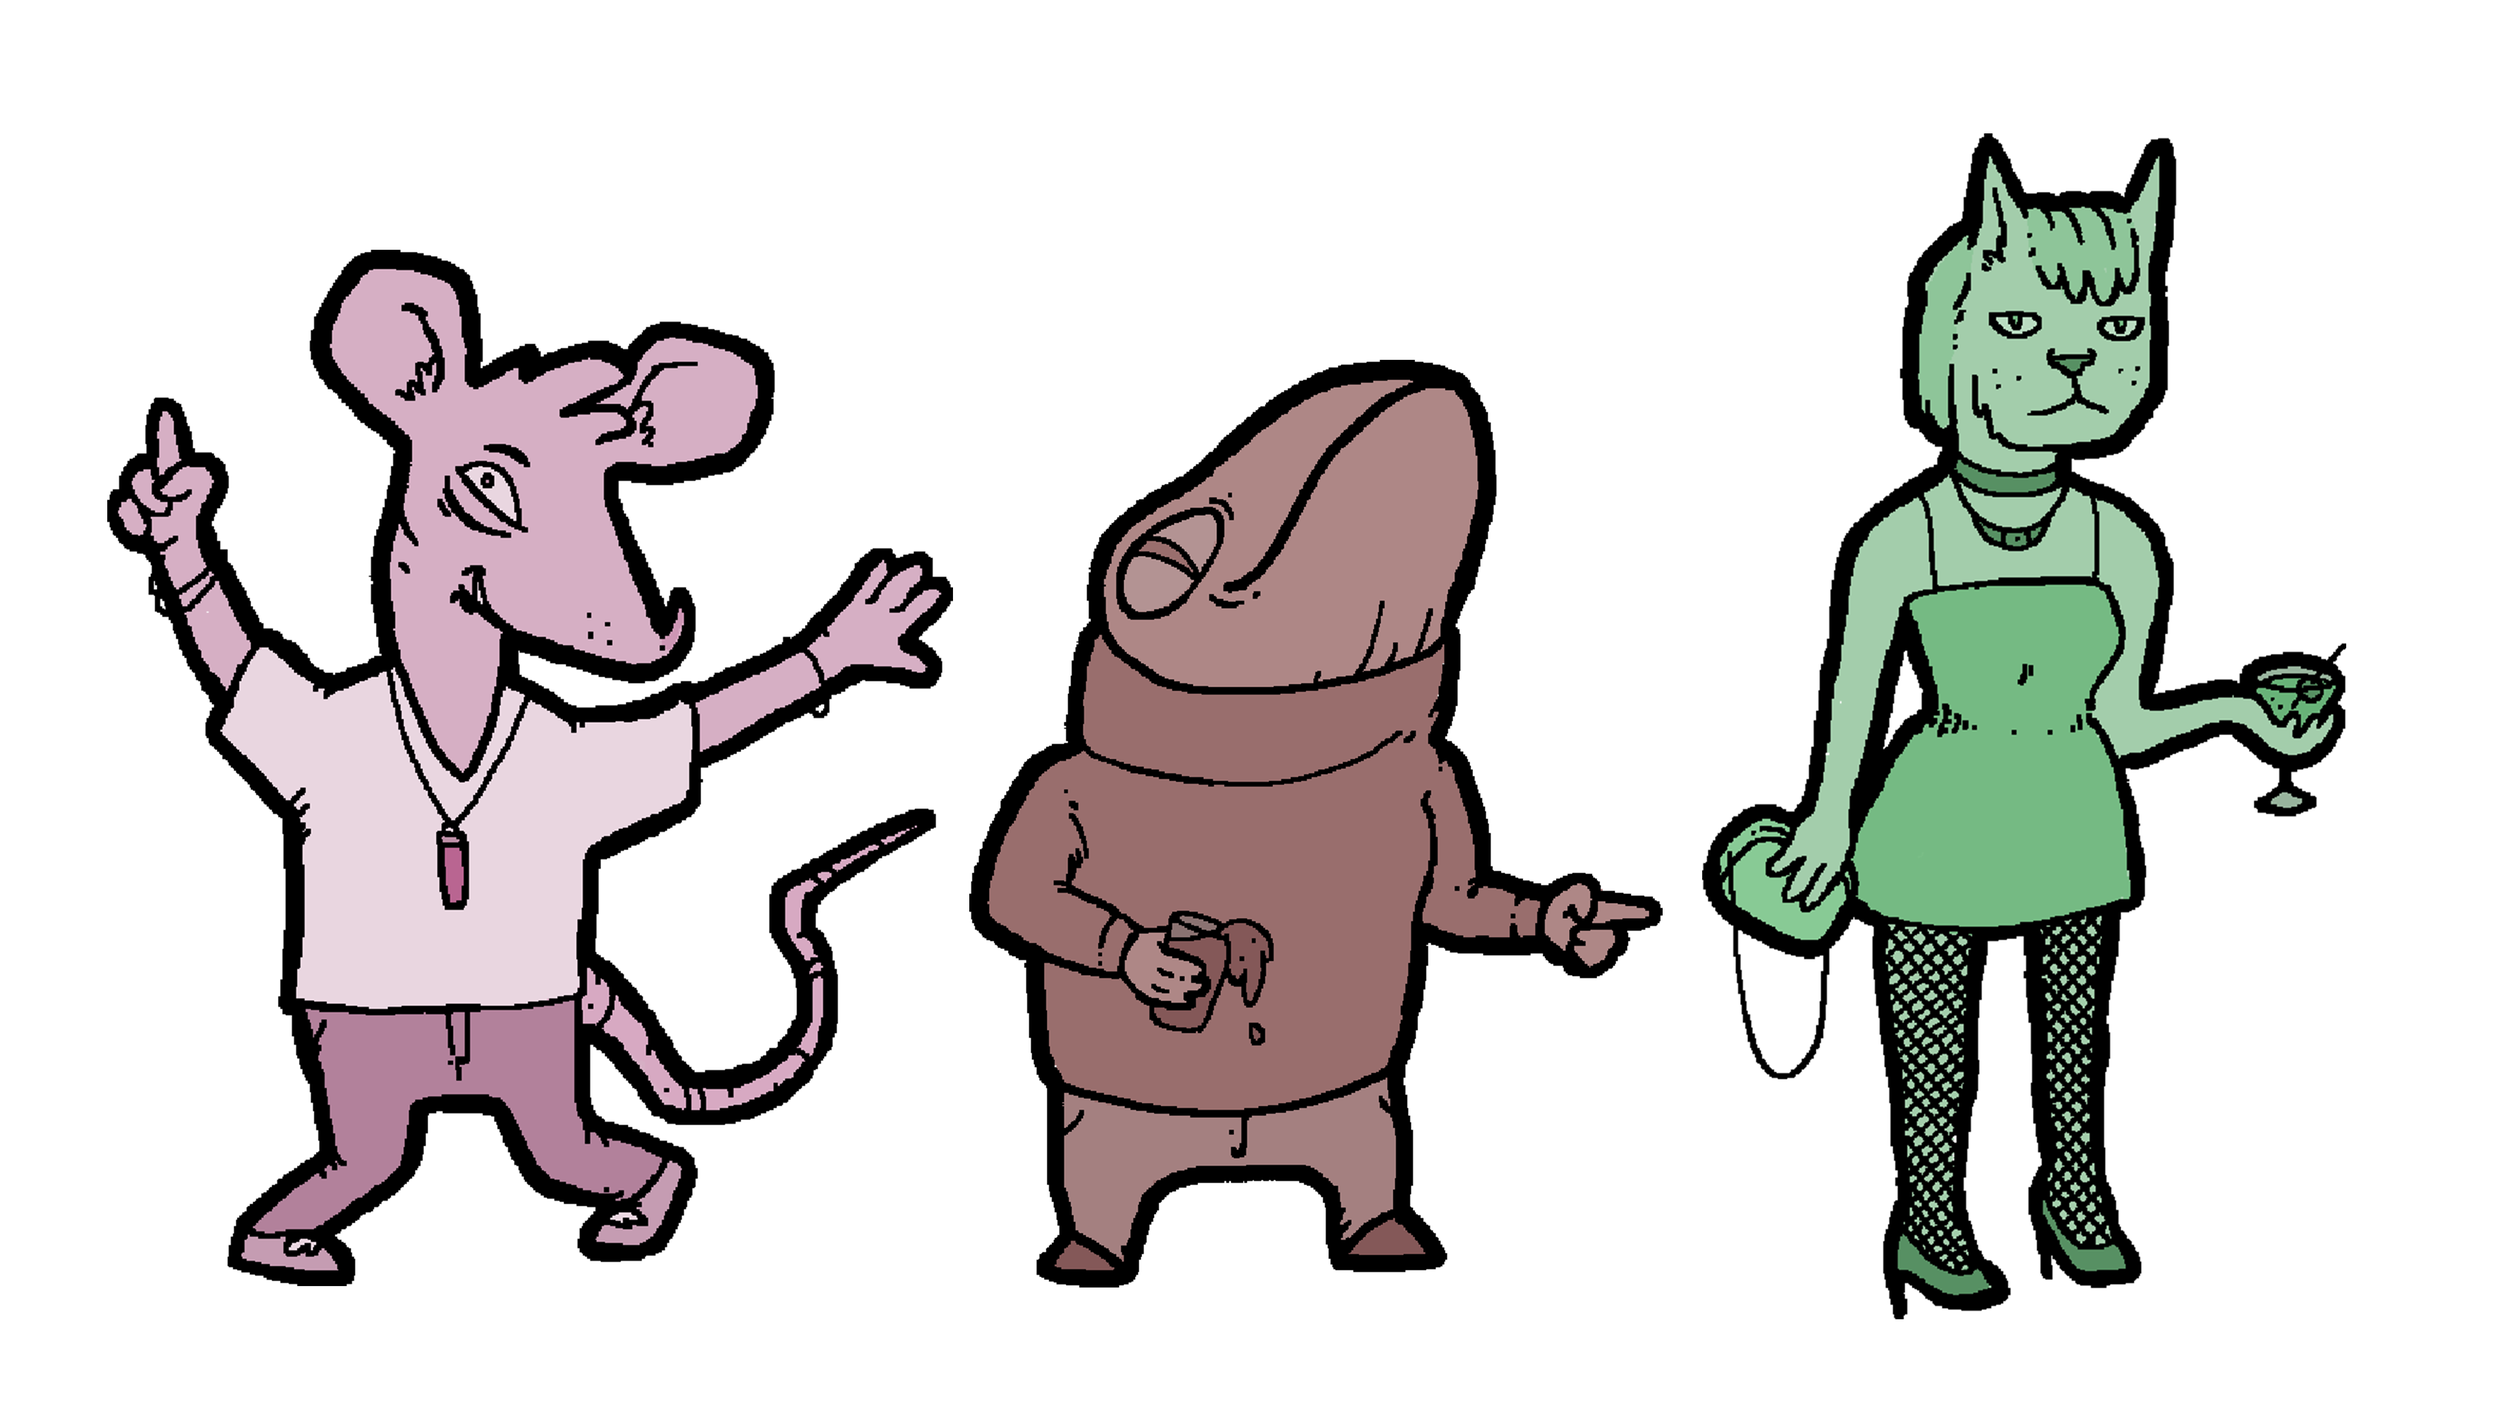 Character Designs for 'Ratbag' Game Concept